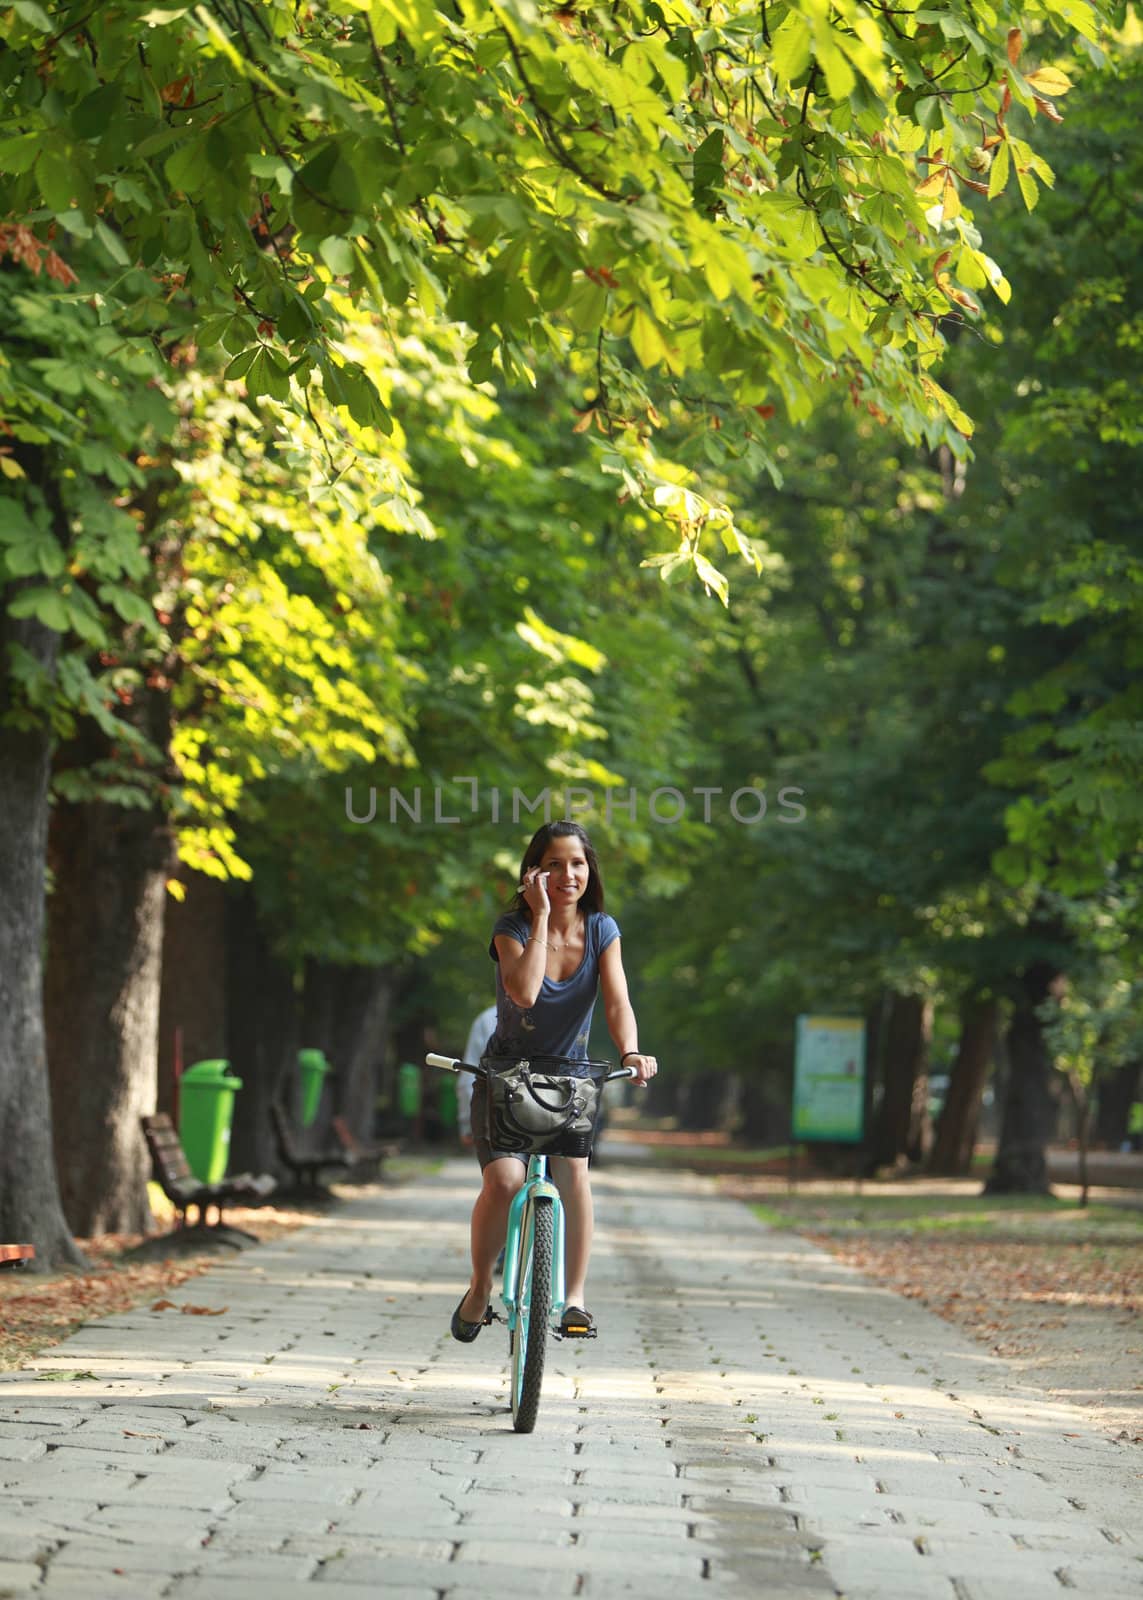 Image of a woman on the phone riding a bicyclein an autumn park